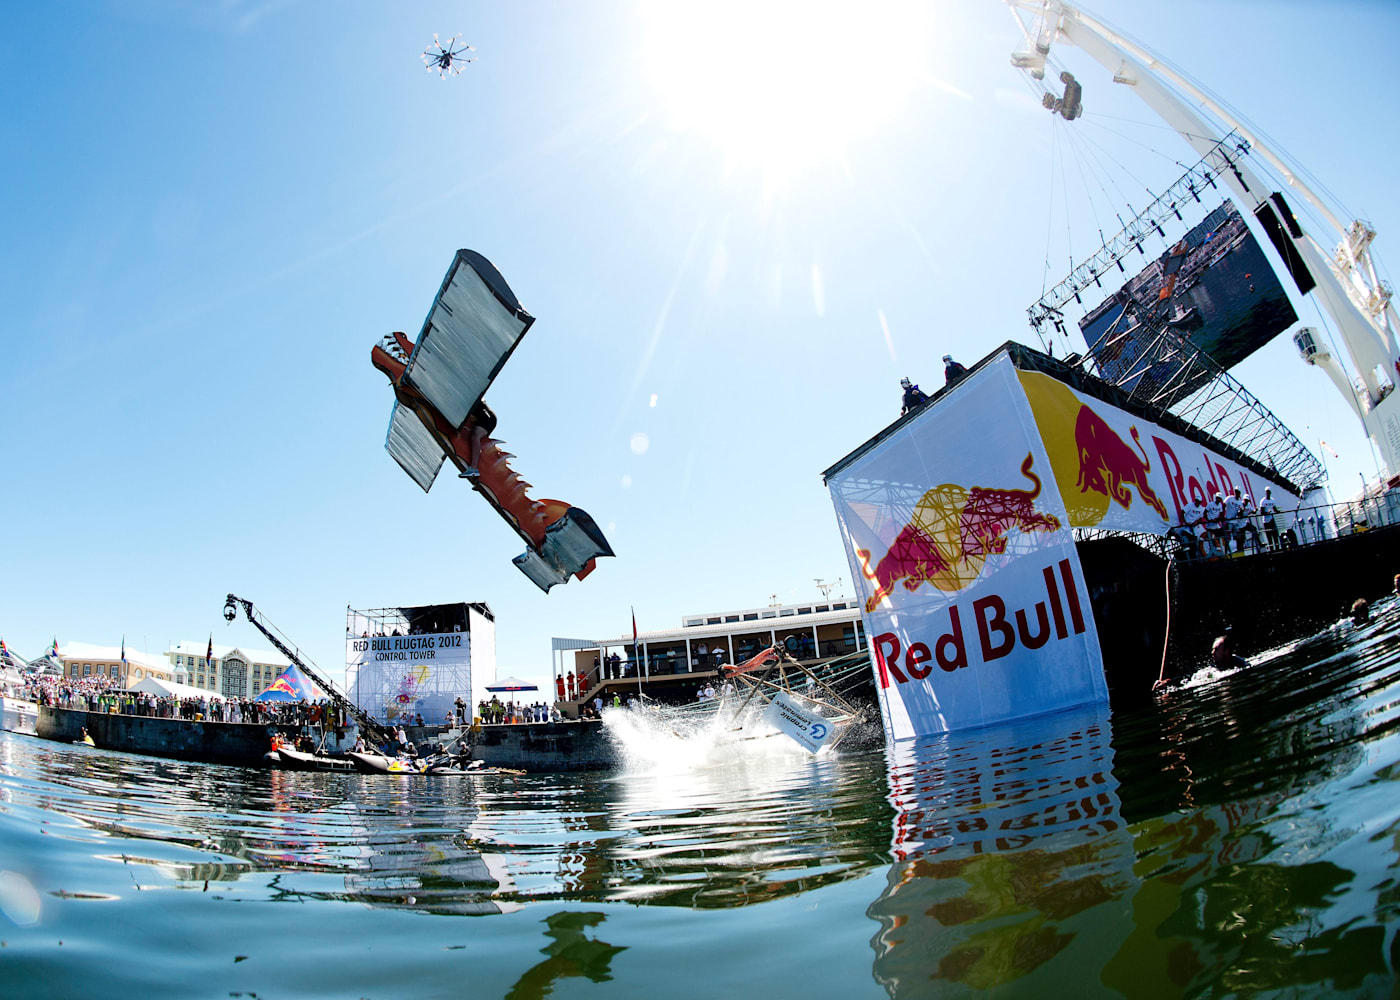 Ruddy beton Måltid Story of Red Bull Flugtag, the World's Wackiest Airshow